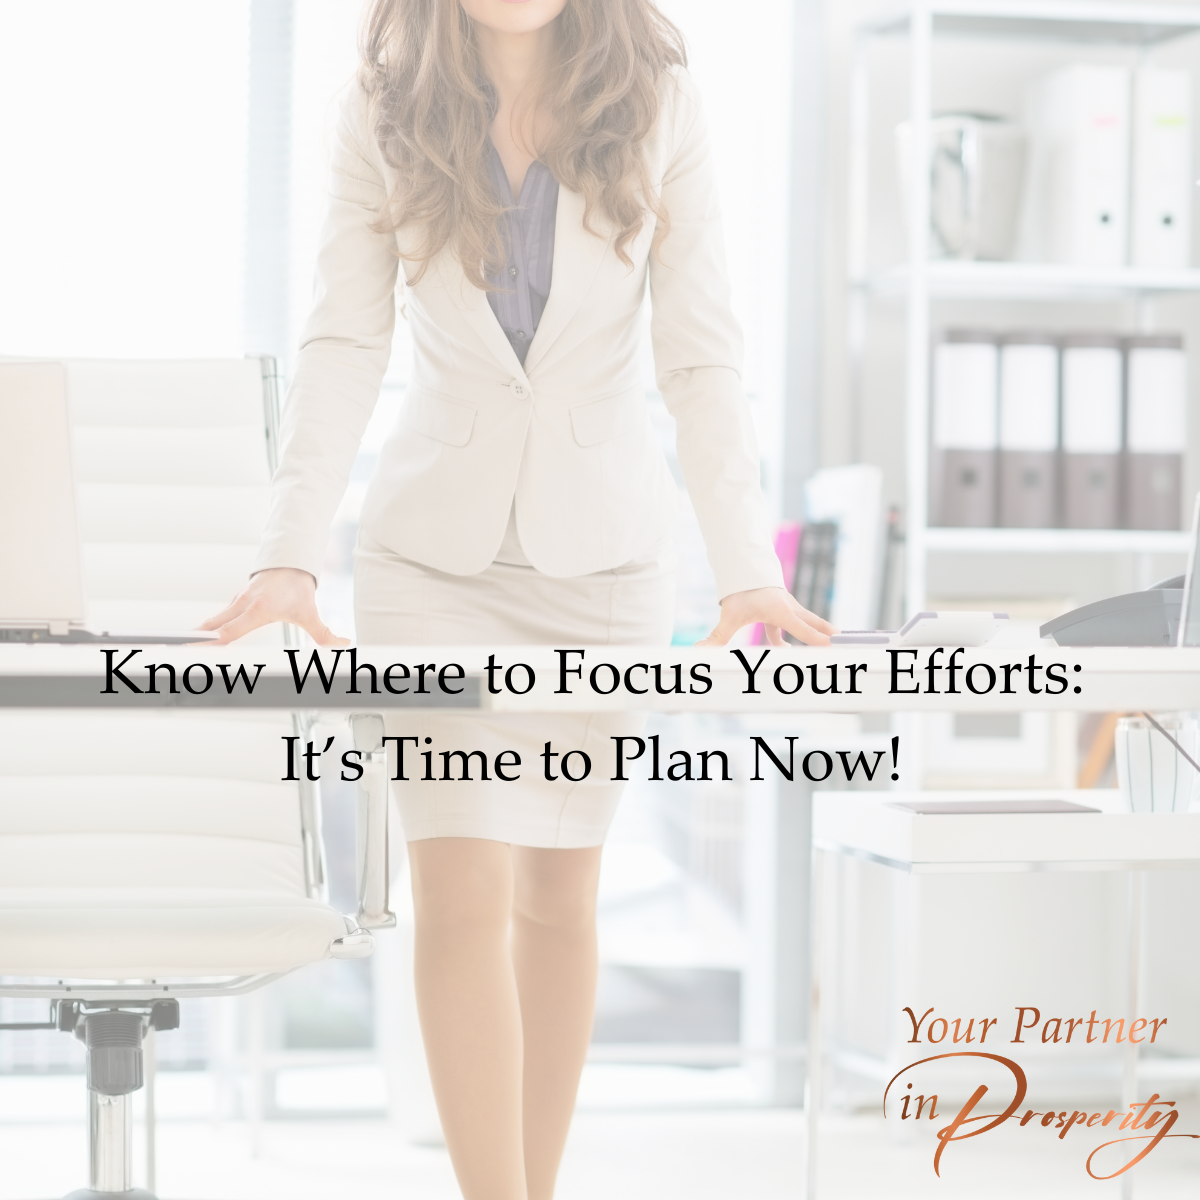 Know Where to Focus Your Efforts: It’s Time to Plan Now!